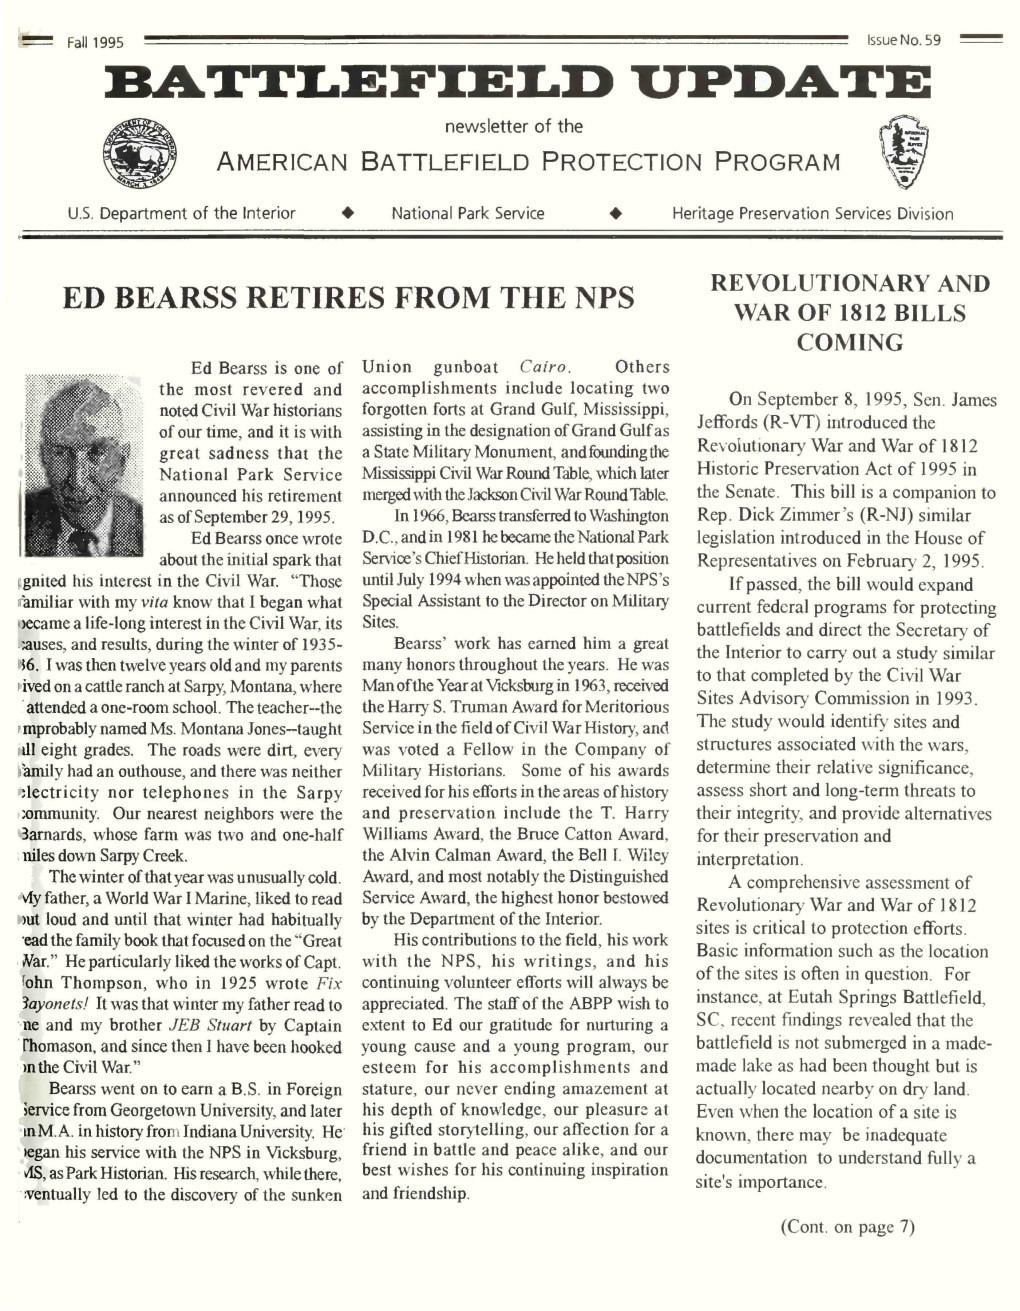 ED BEARSS RETIRES from the NPS WAR of 1812 BILLS COMING Ed Bearss Is One of Union Gunboat Cairo